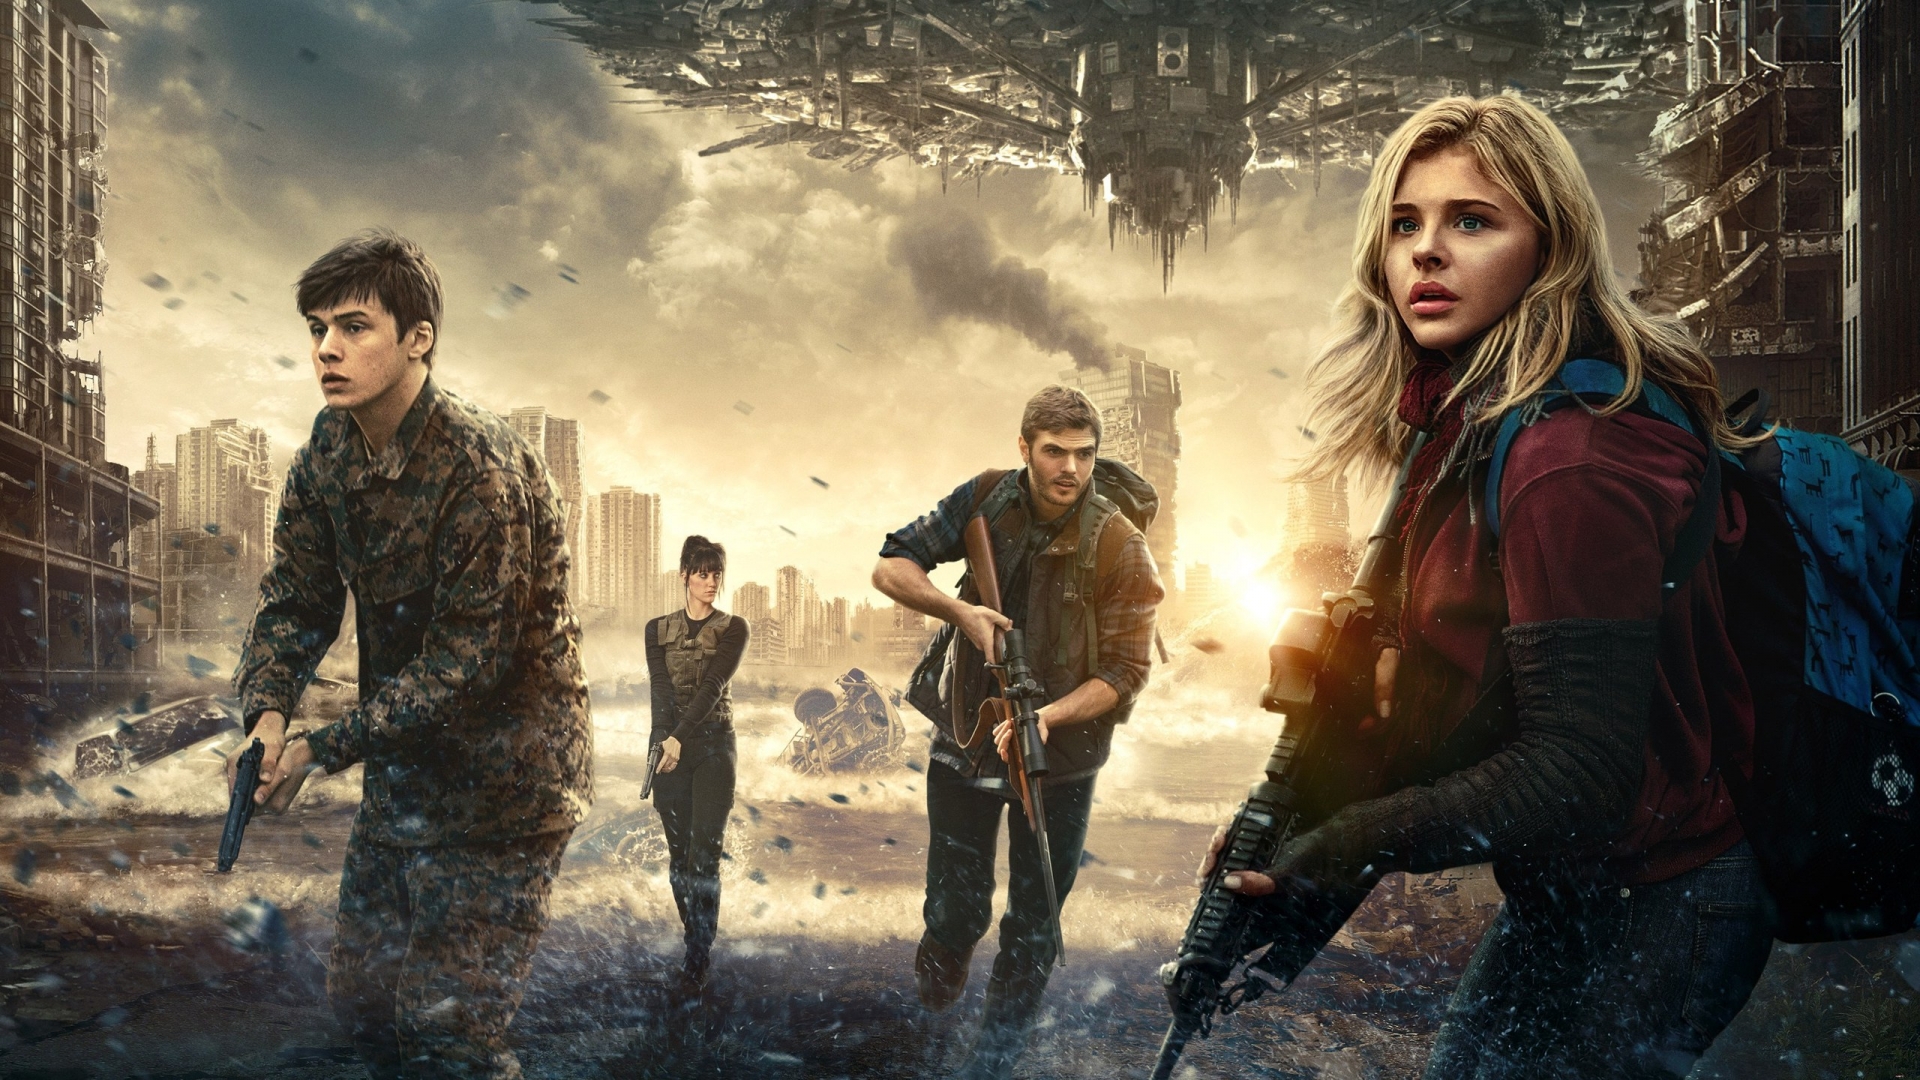 The 5th Wave Film 2016 for 1920 x 1080 HDTV 1080p resolution